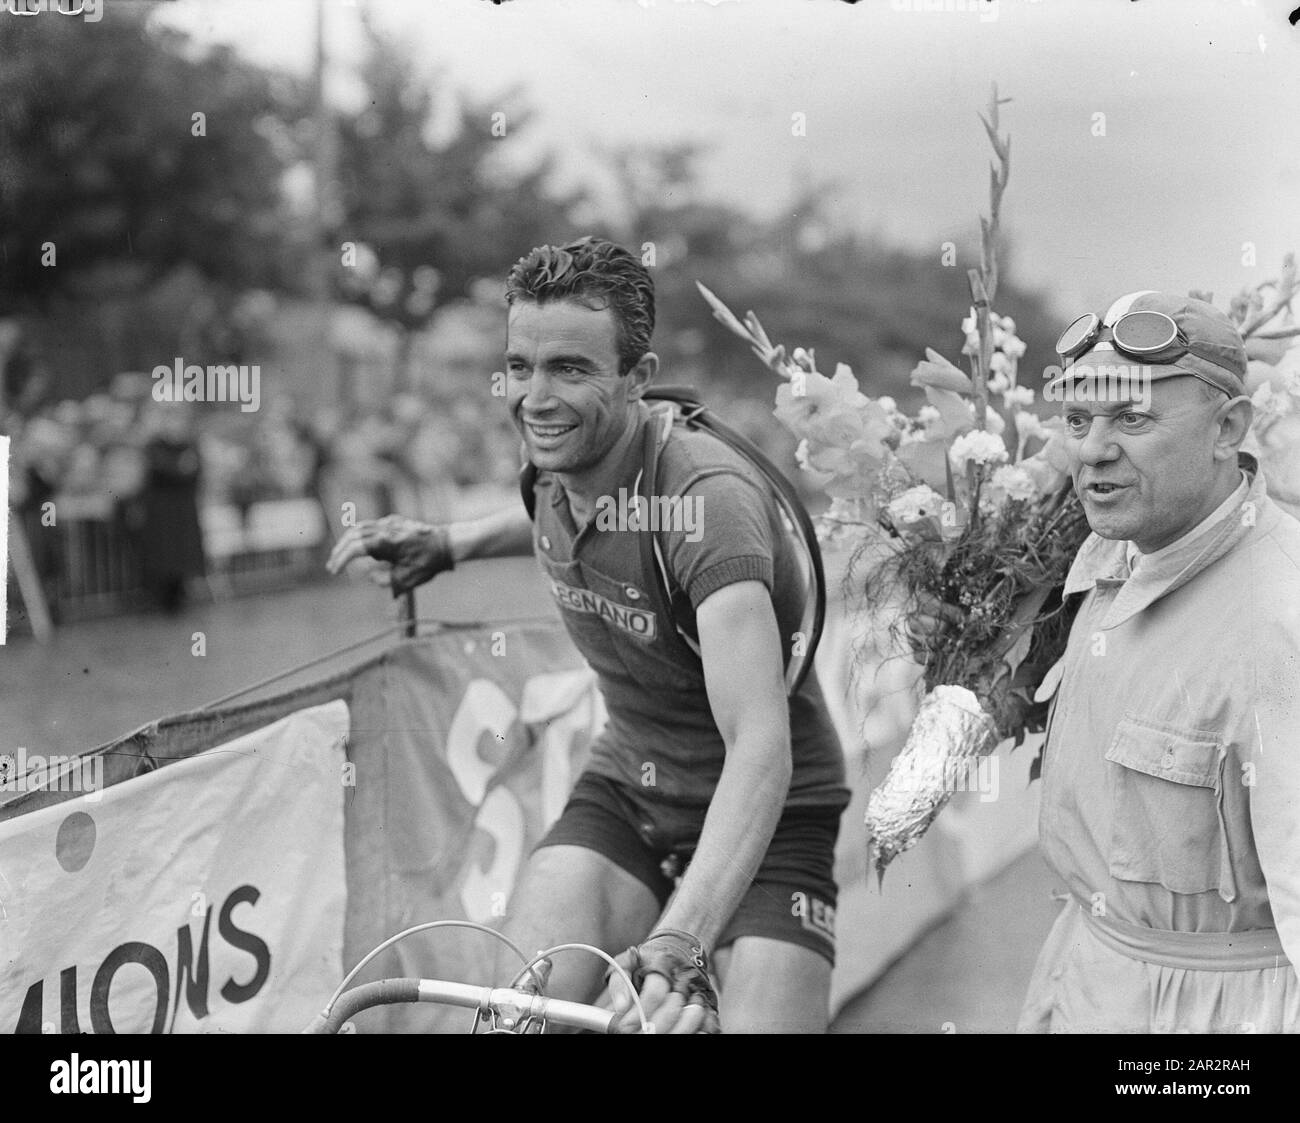 Tour de France, winner of the 2nd stage (Reims Liège), Adolfo Leoni (Italy) Date: 14 July 1950 Location: Belgium, Liège Keywords: sport, cycling Personal name: Leoni Adolfo Stock Photo